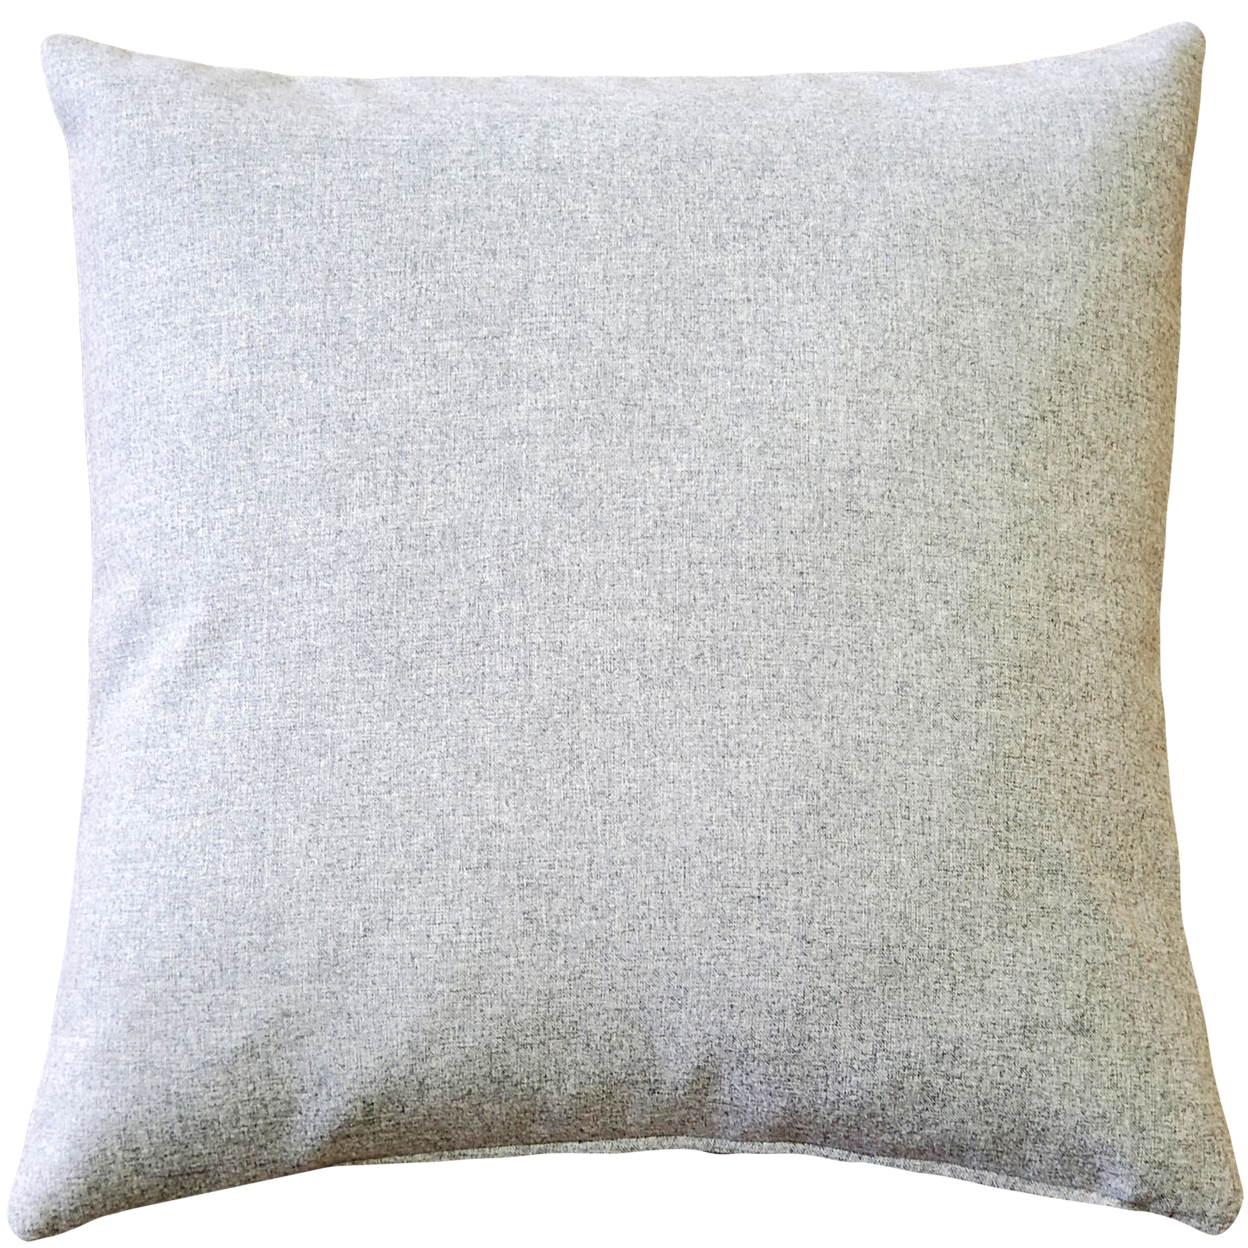 Meraki Paradiso Blue Throw Pillow 19x19 Inches Square, Complete Pillow With Polyfill Pillow Insert